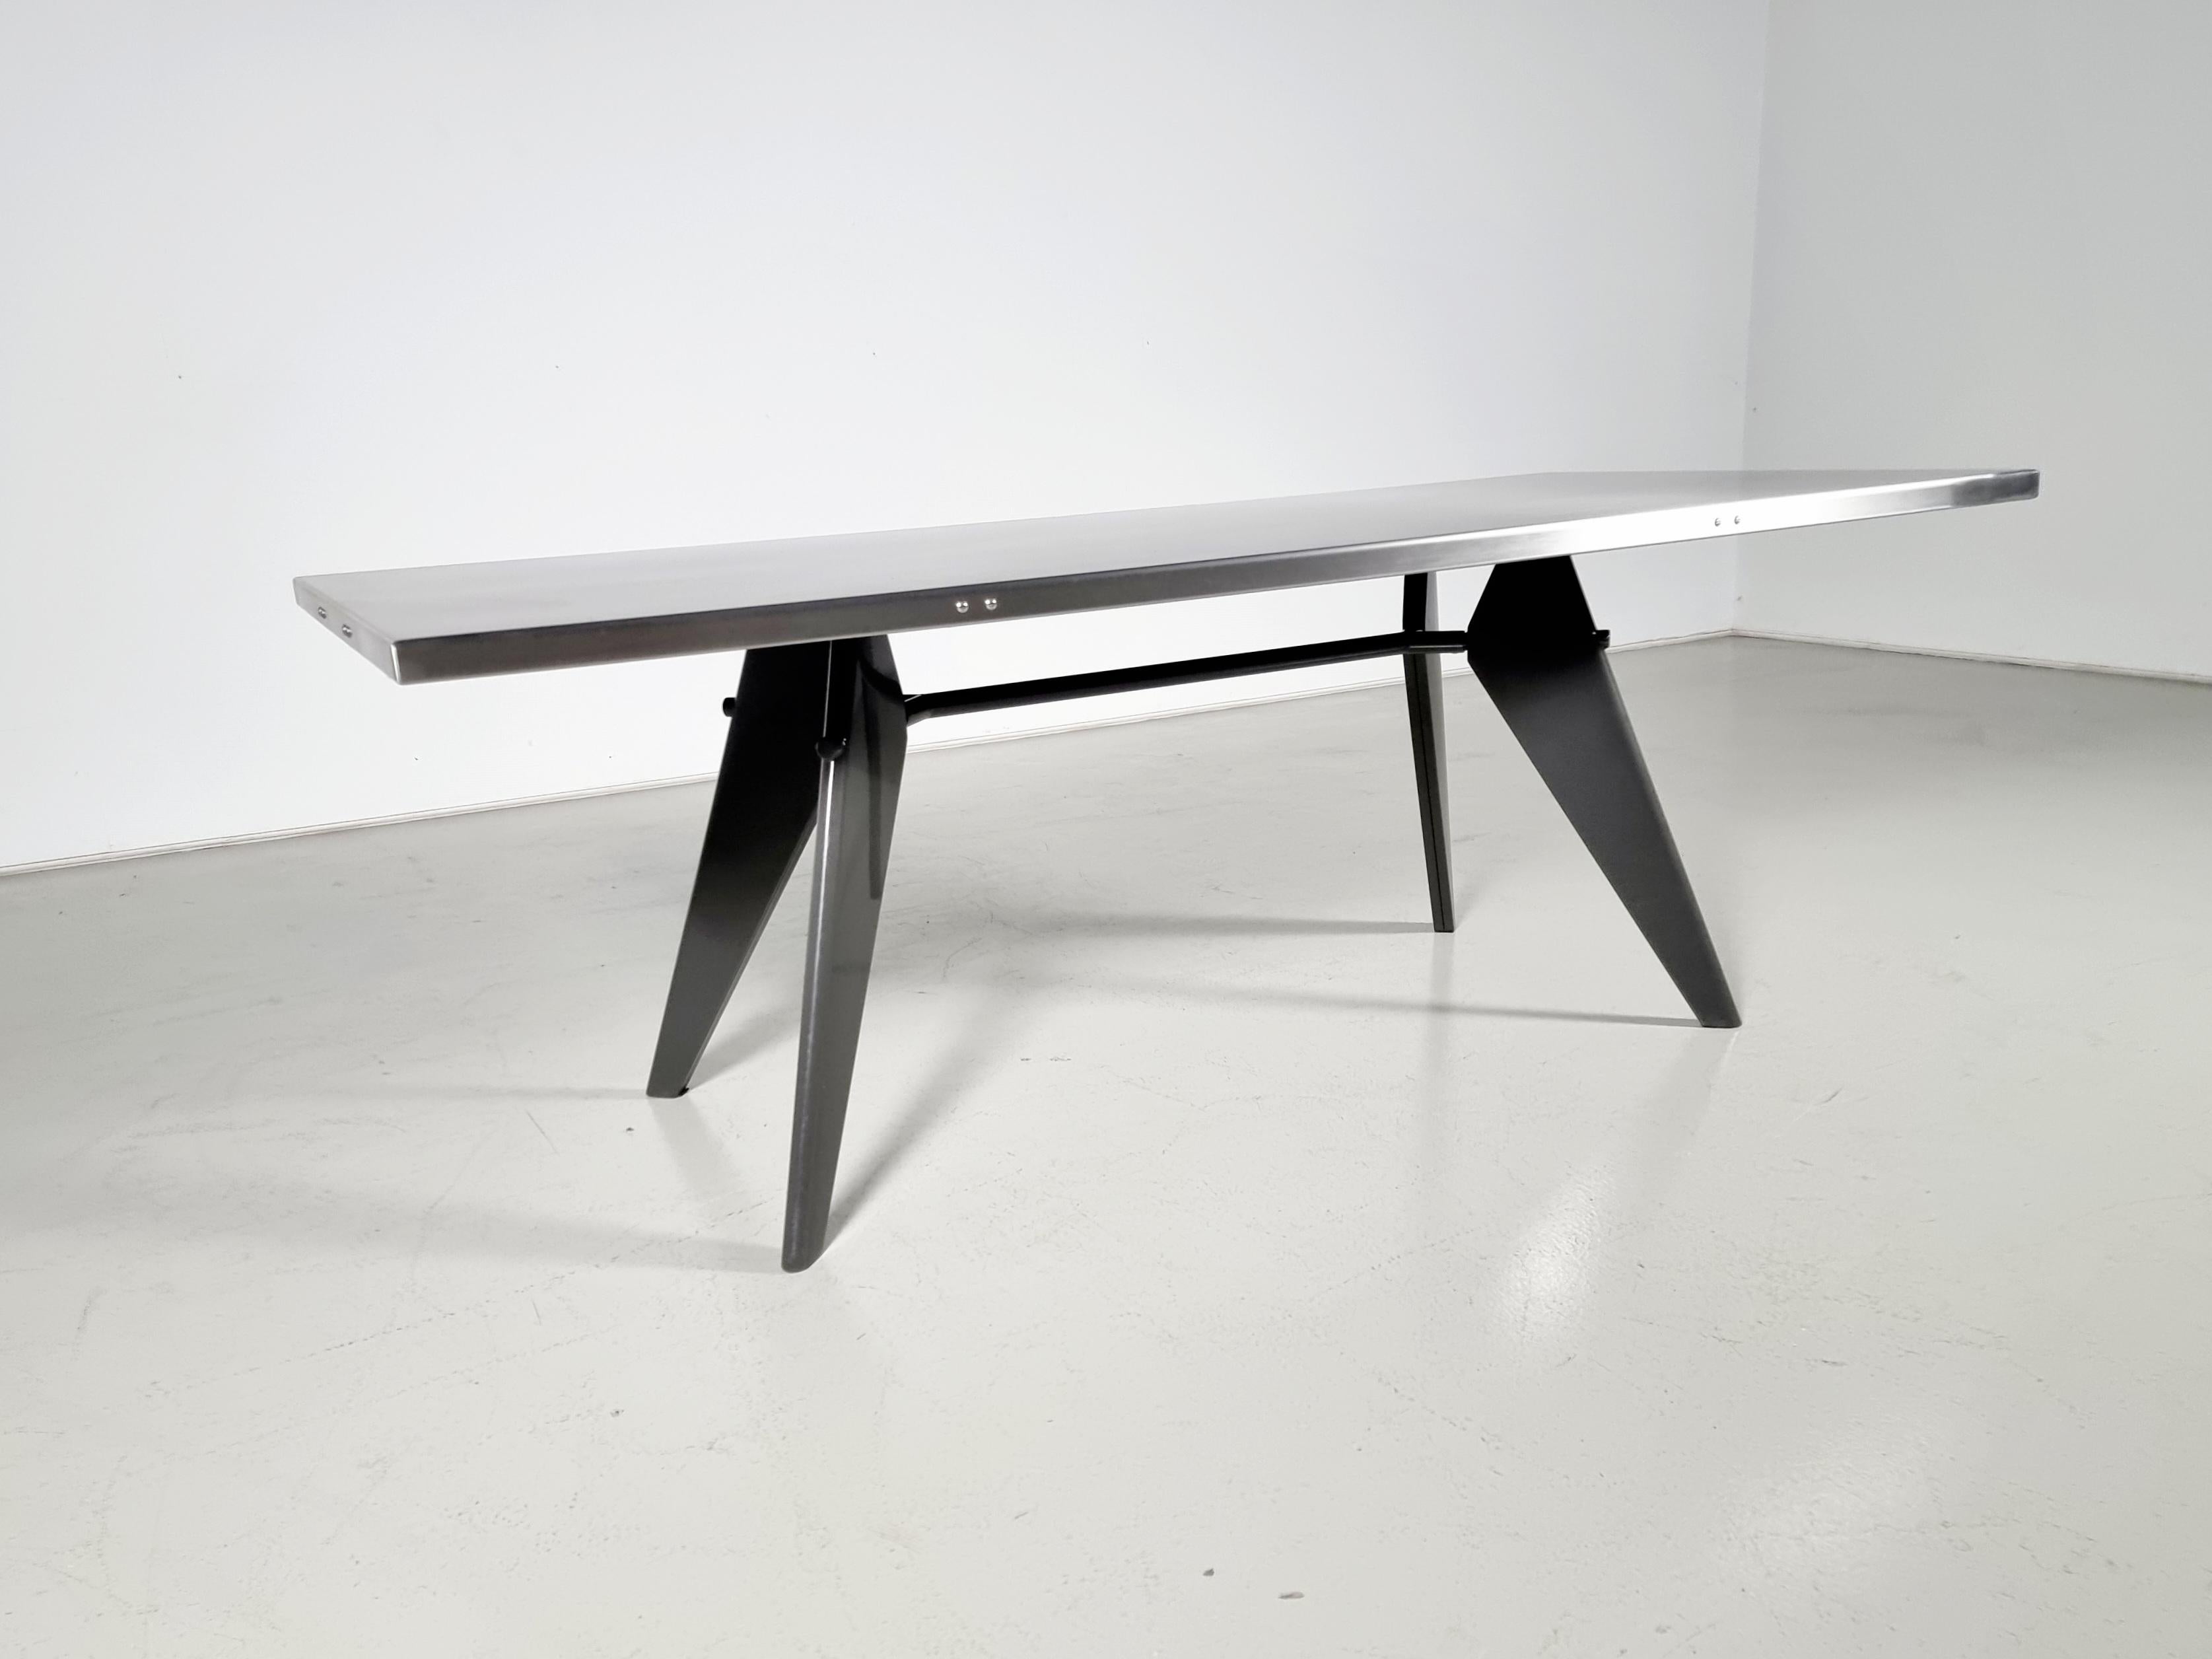 Contemporary Jean Prouve by G-Star Raw for Vitra S.A.M. Tropique Table with matching chairs